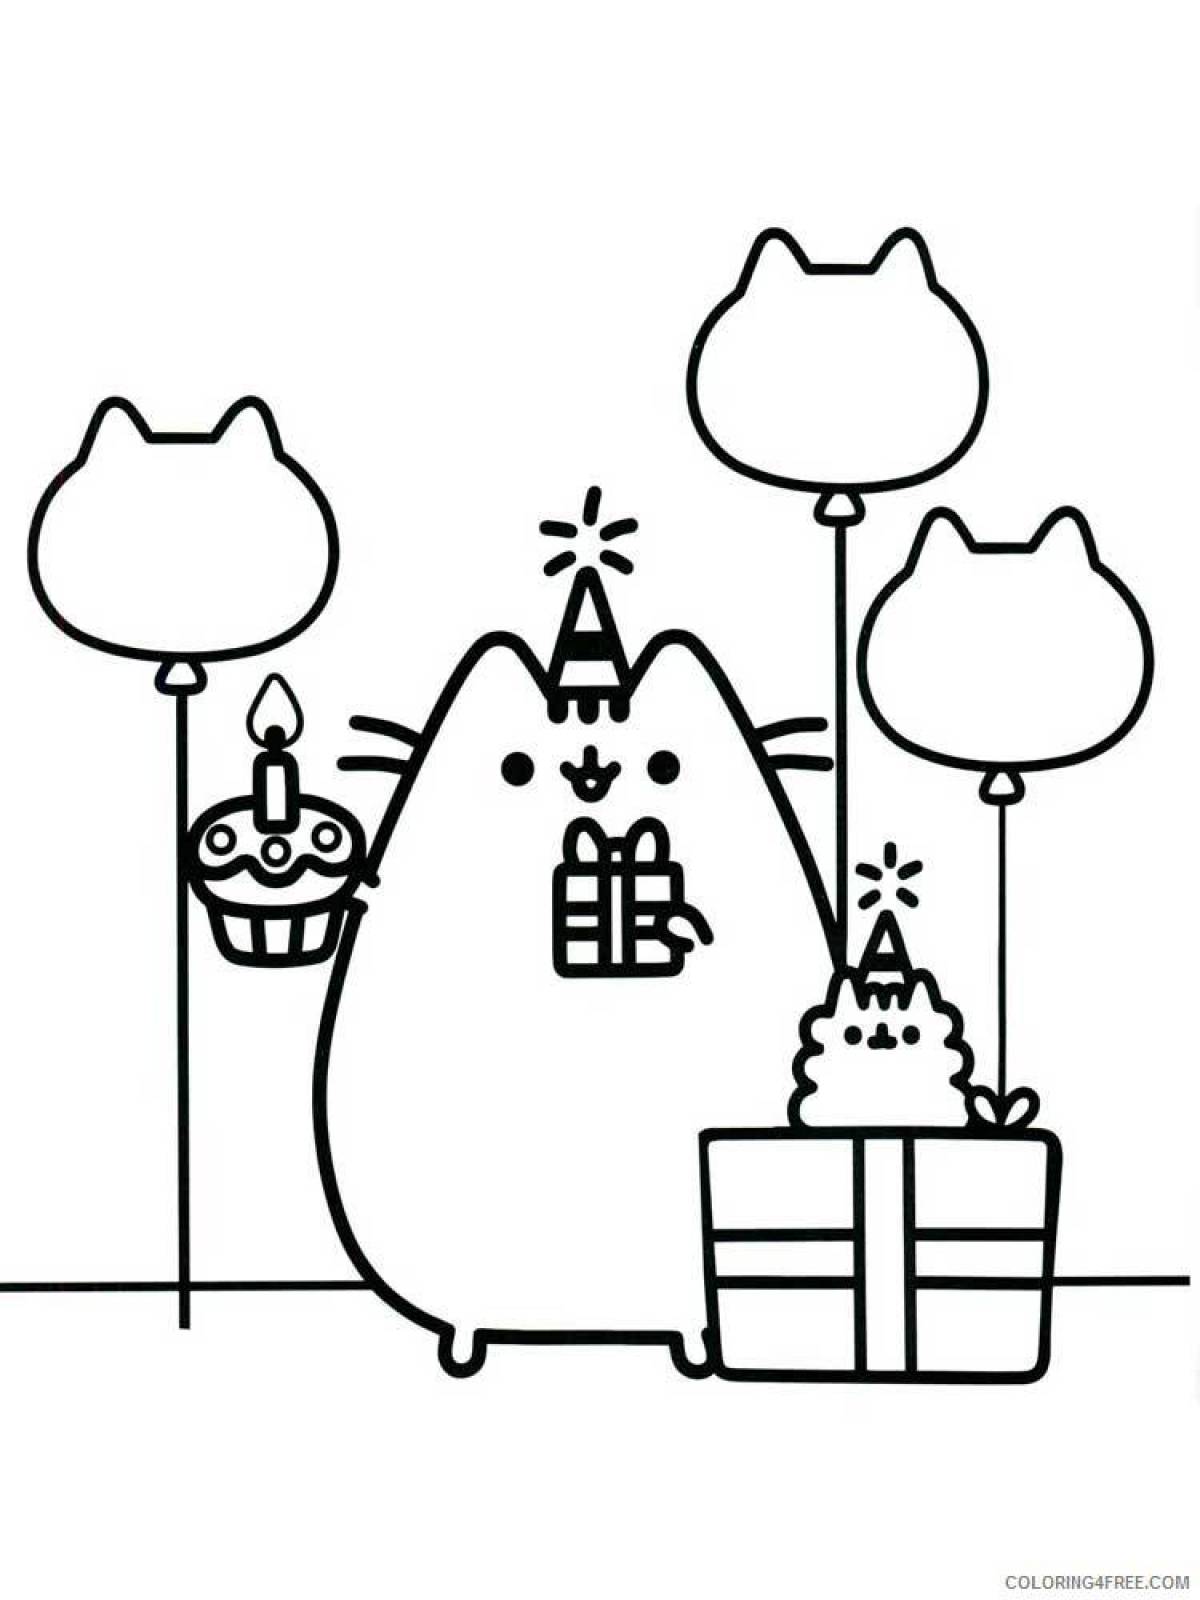 Fluffy Cat Pusheen Coloring Page